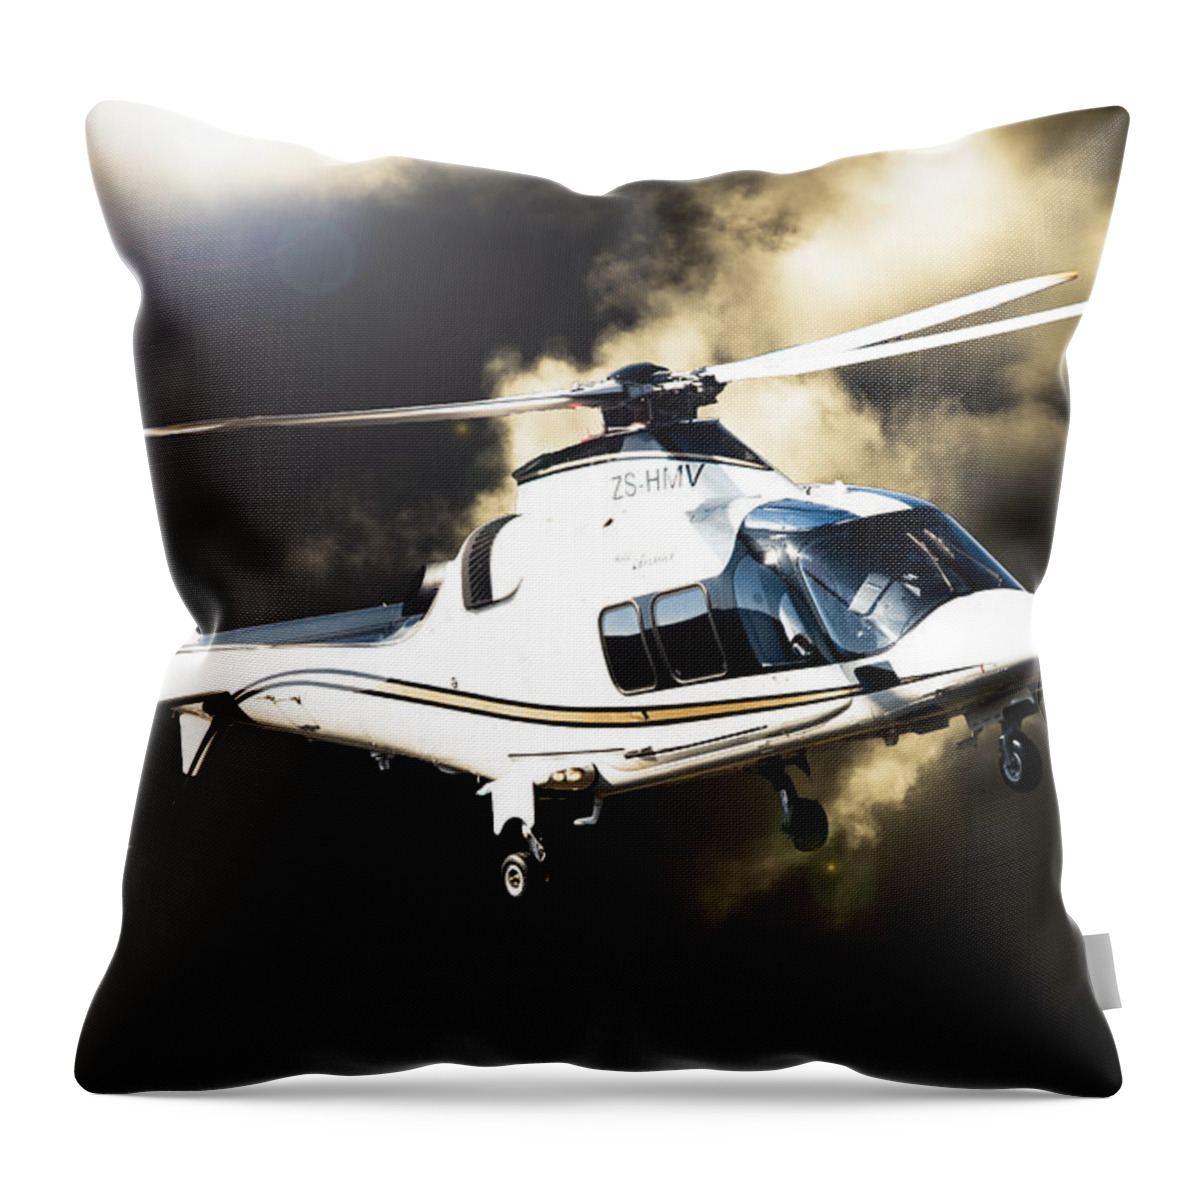 Agusta A109s Grand Throw Pillow featuring the photograph Grand Flying by Paul Job